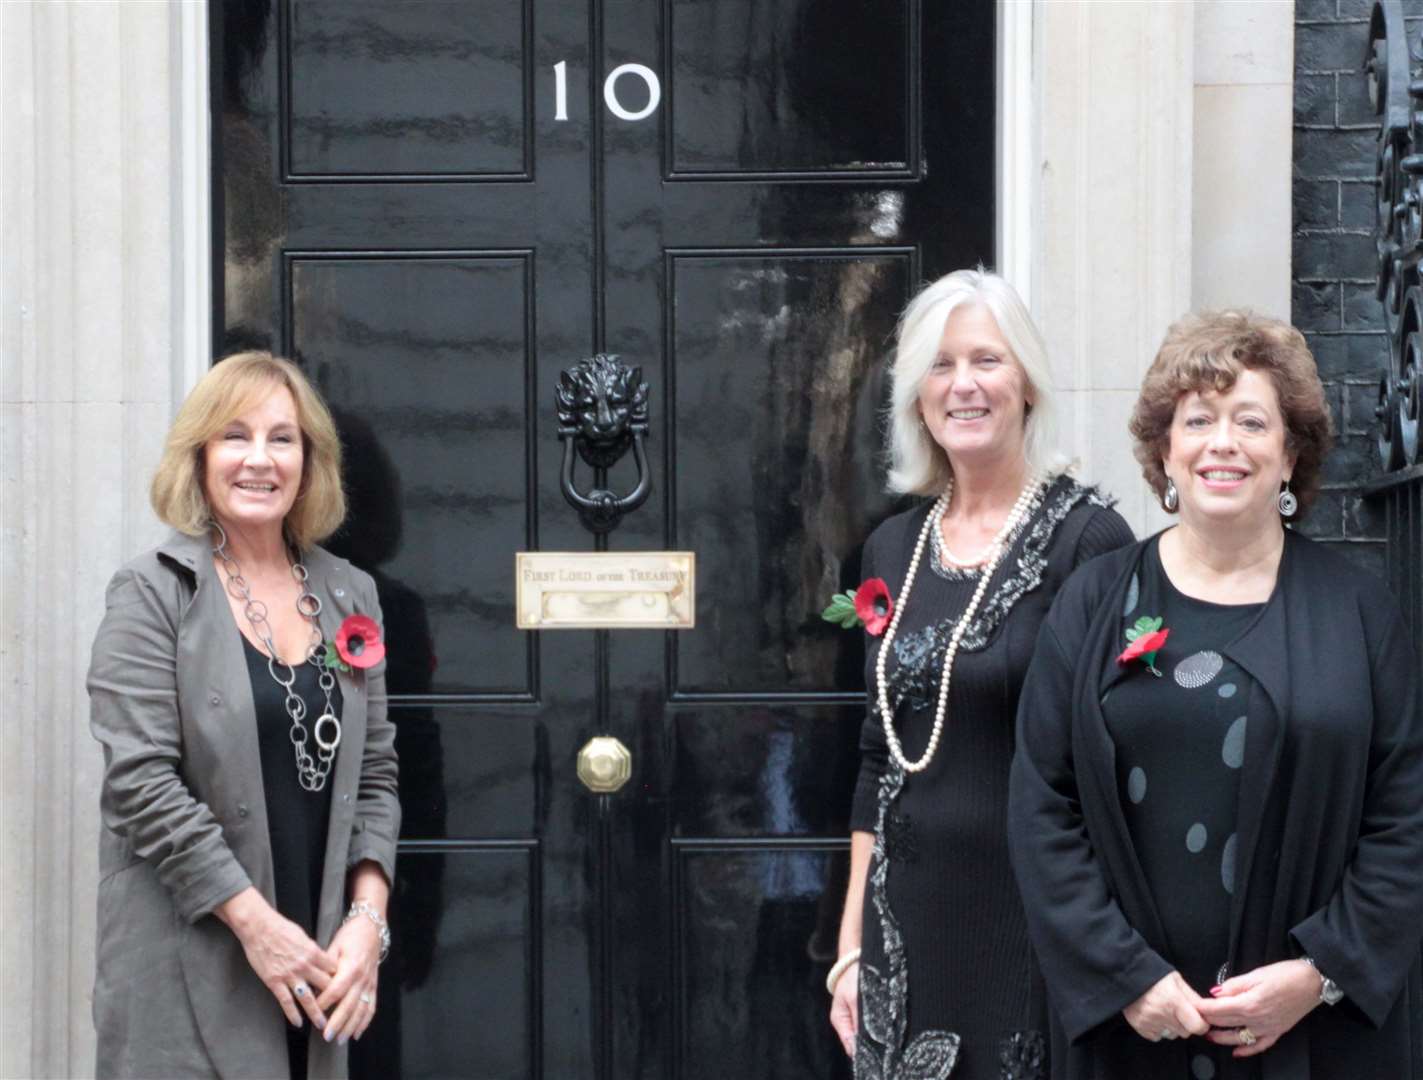 Amanda Mount, Joanna Thomson and Fiona Punter from the Save Our Sands campaign group delivered a petition to No10 Downing Street